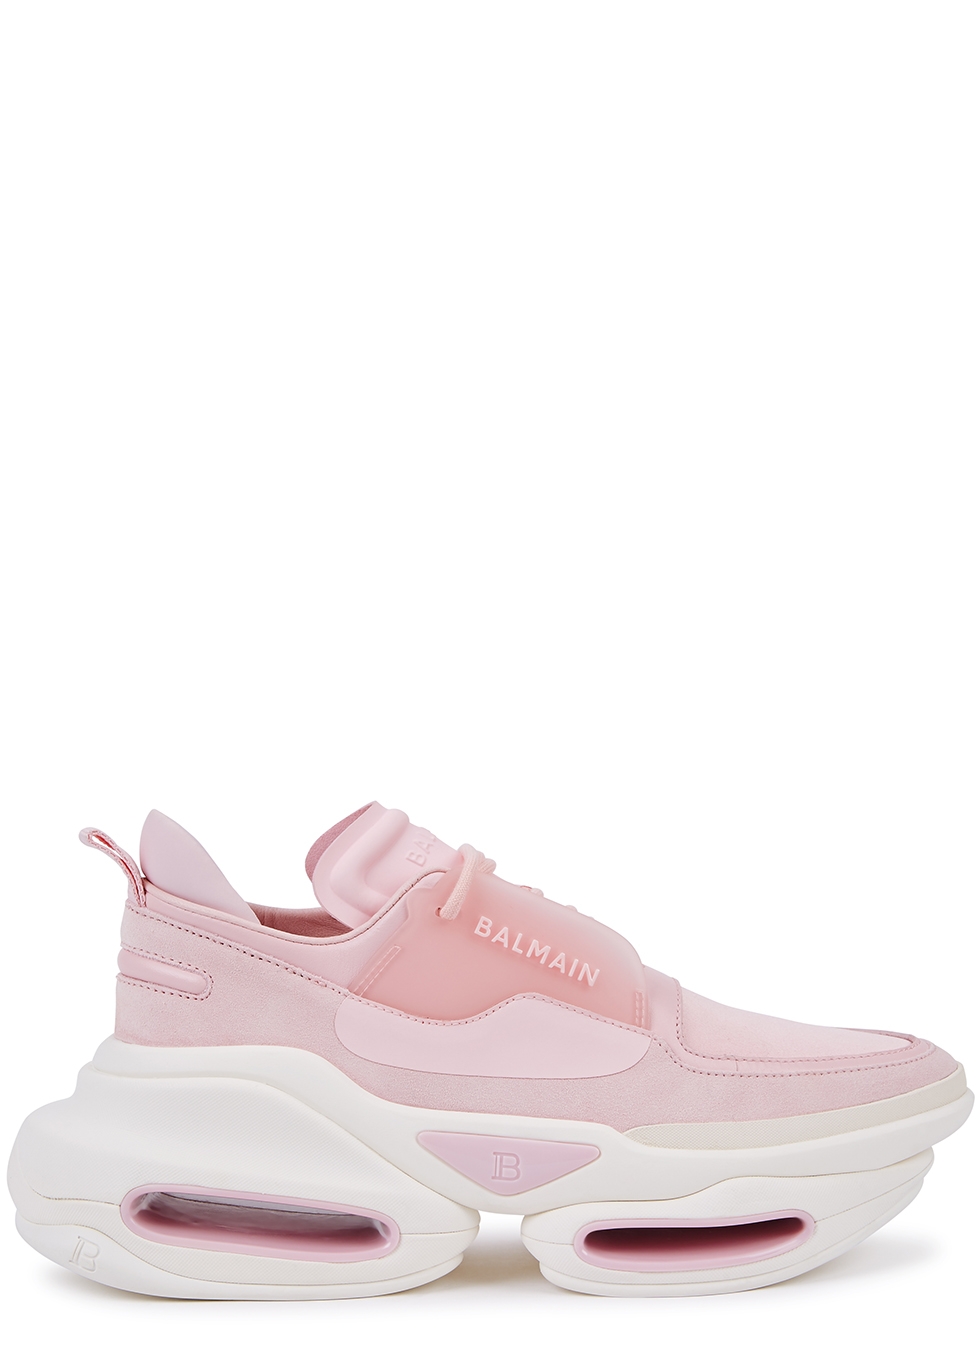 Bold pink leather sneakers